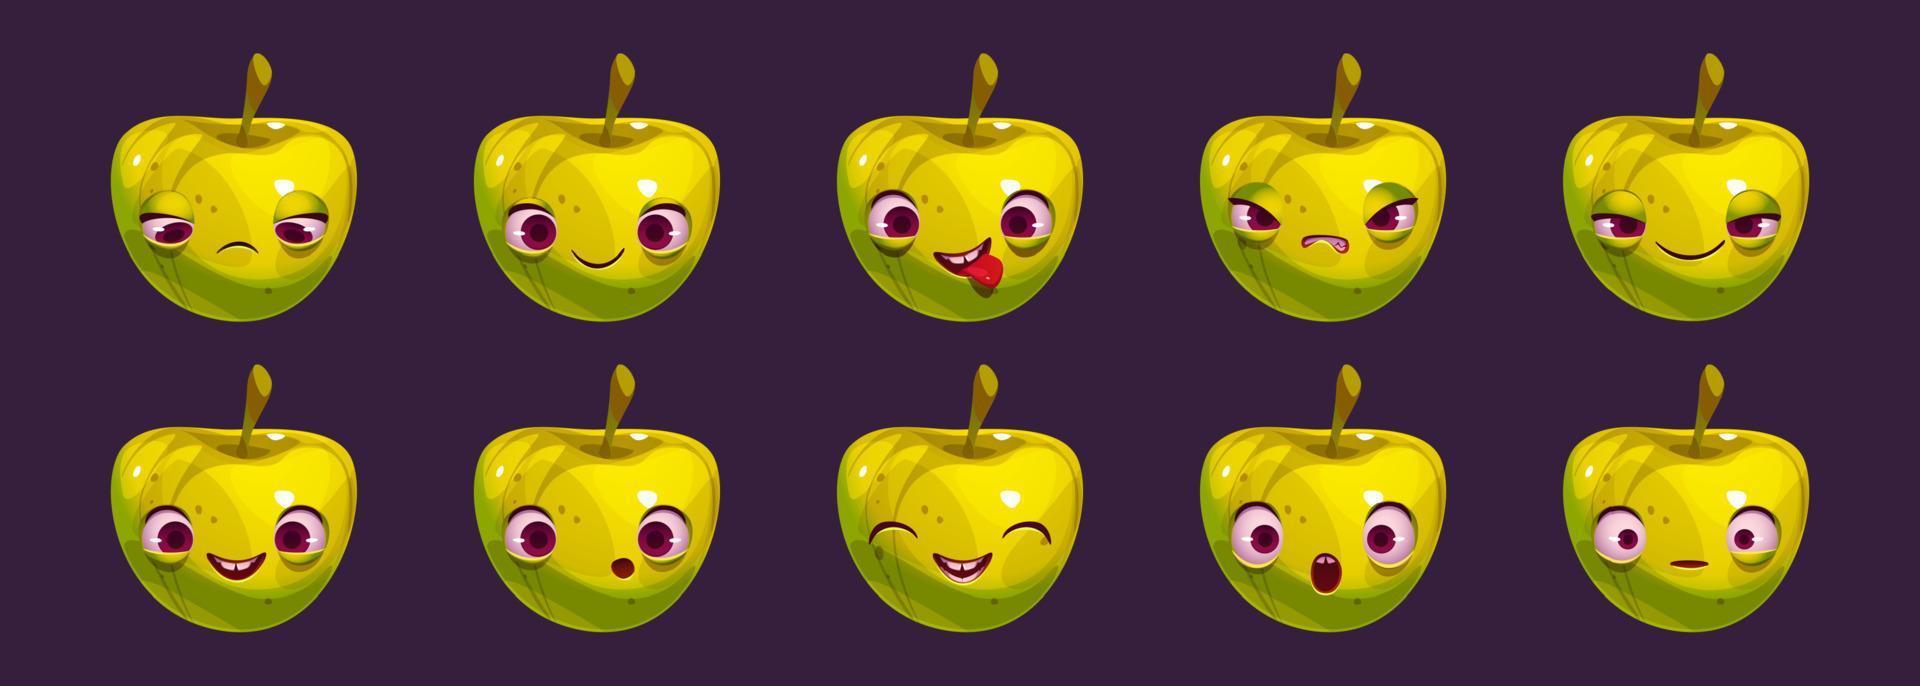 Cartoon apple character with different emotions vector